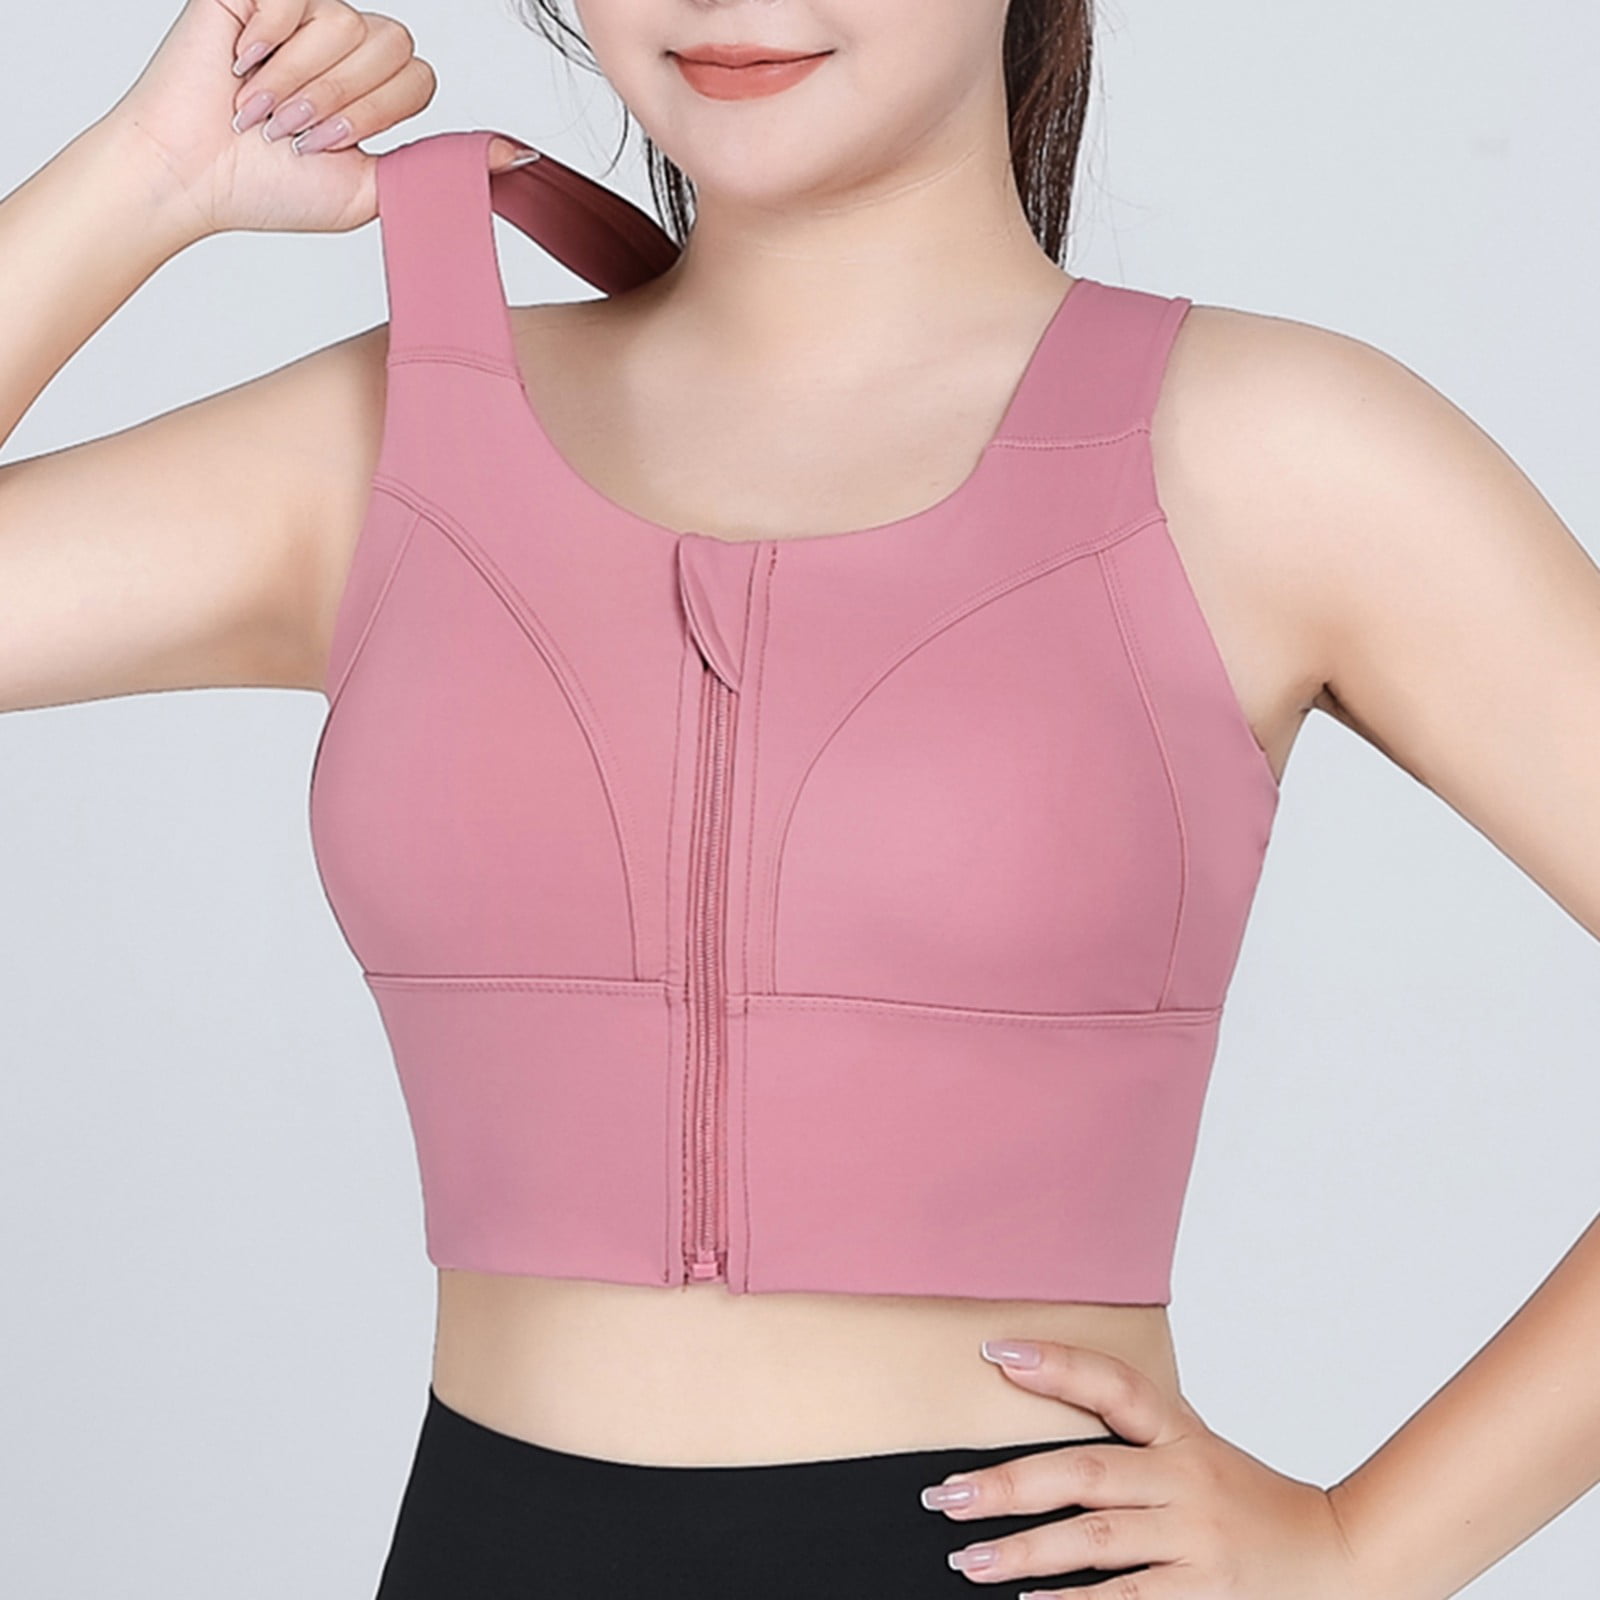 Aueoeo Cotton Sports Bras for Women, Fitness Clothes for Women